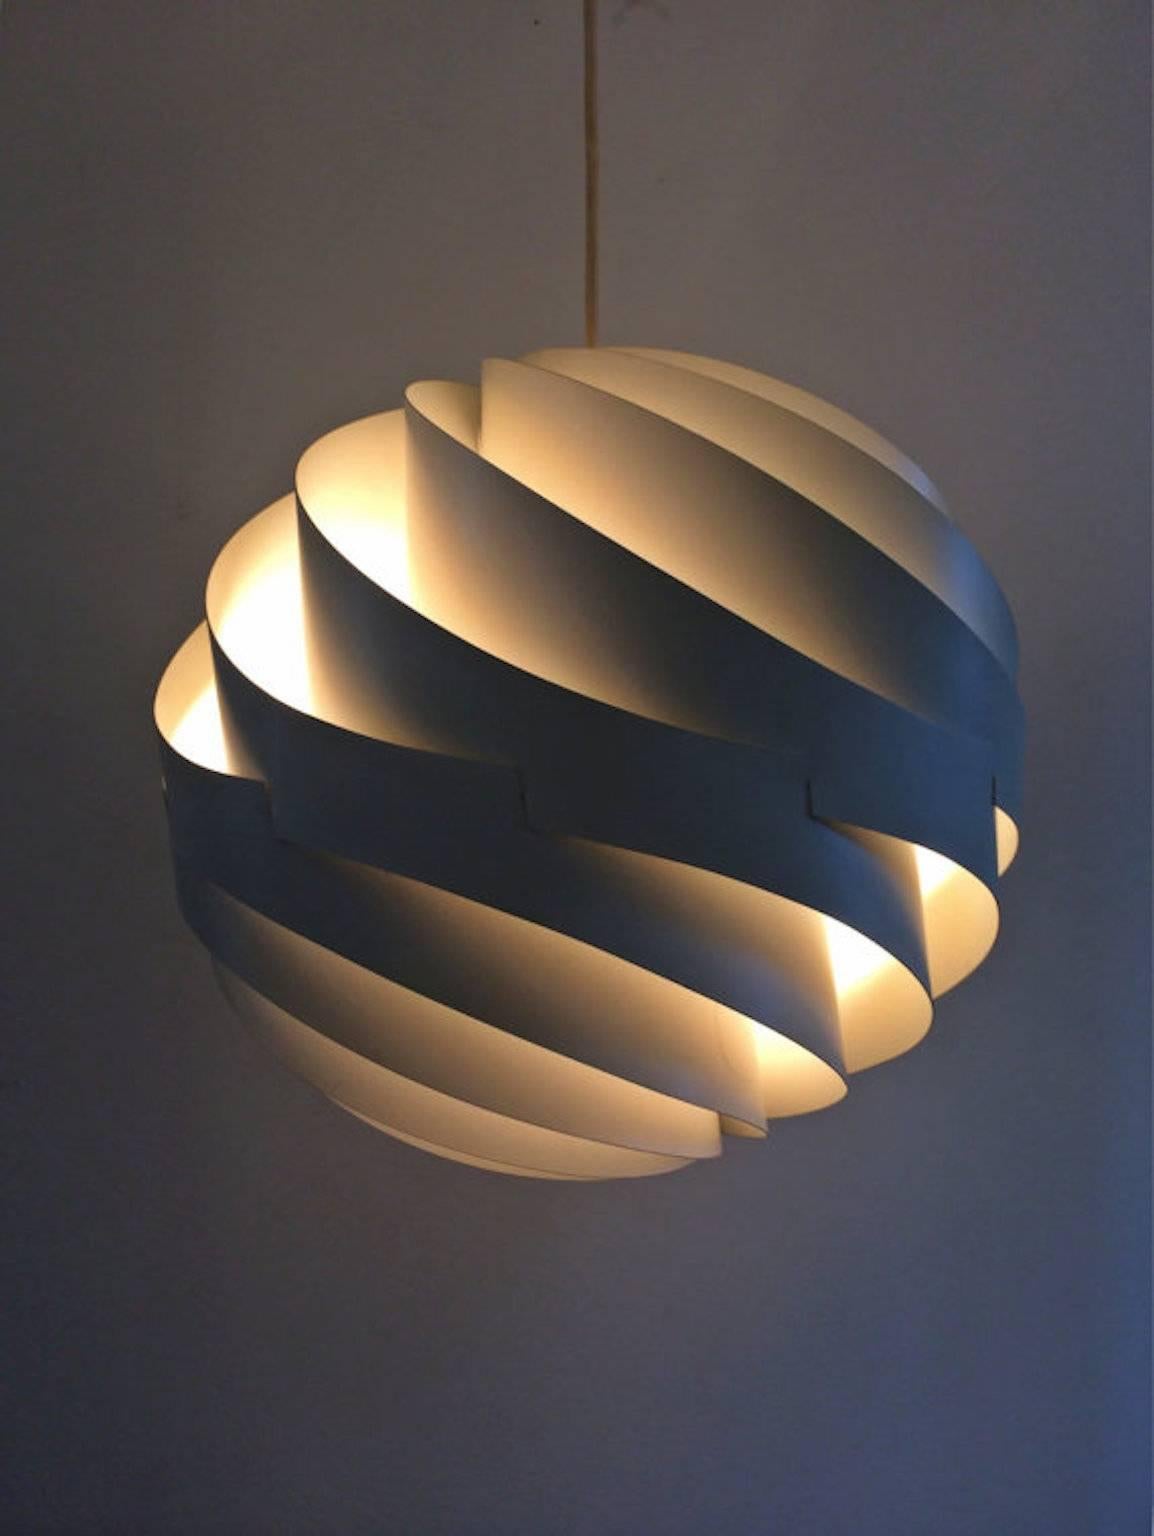 The Turbo pendant was designed in 1965 by Louis Weisdorf and put in production in 1967 by Lyfa. 

This amazing lamp illustrates design at its best: Simple in form, yet complex in structure and combines a sense of airiness and strength in a